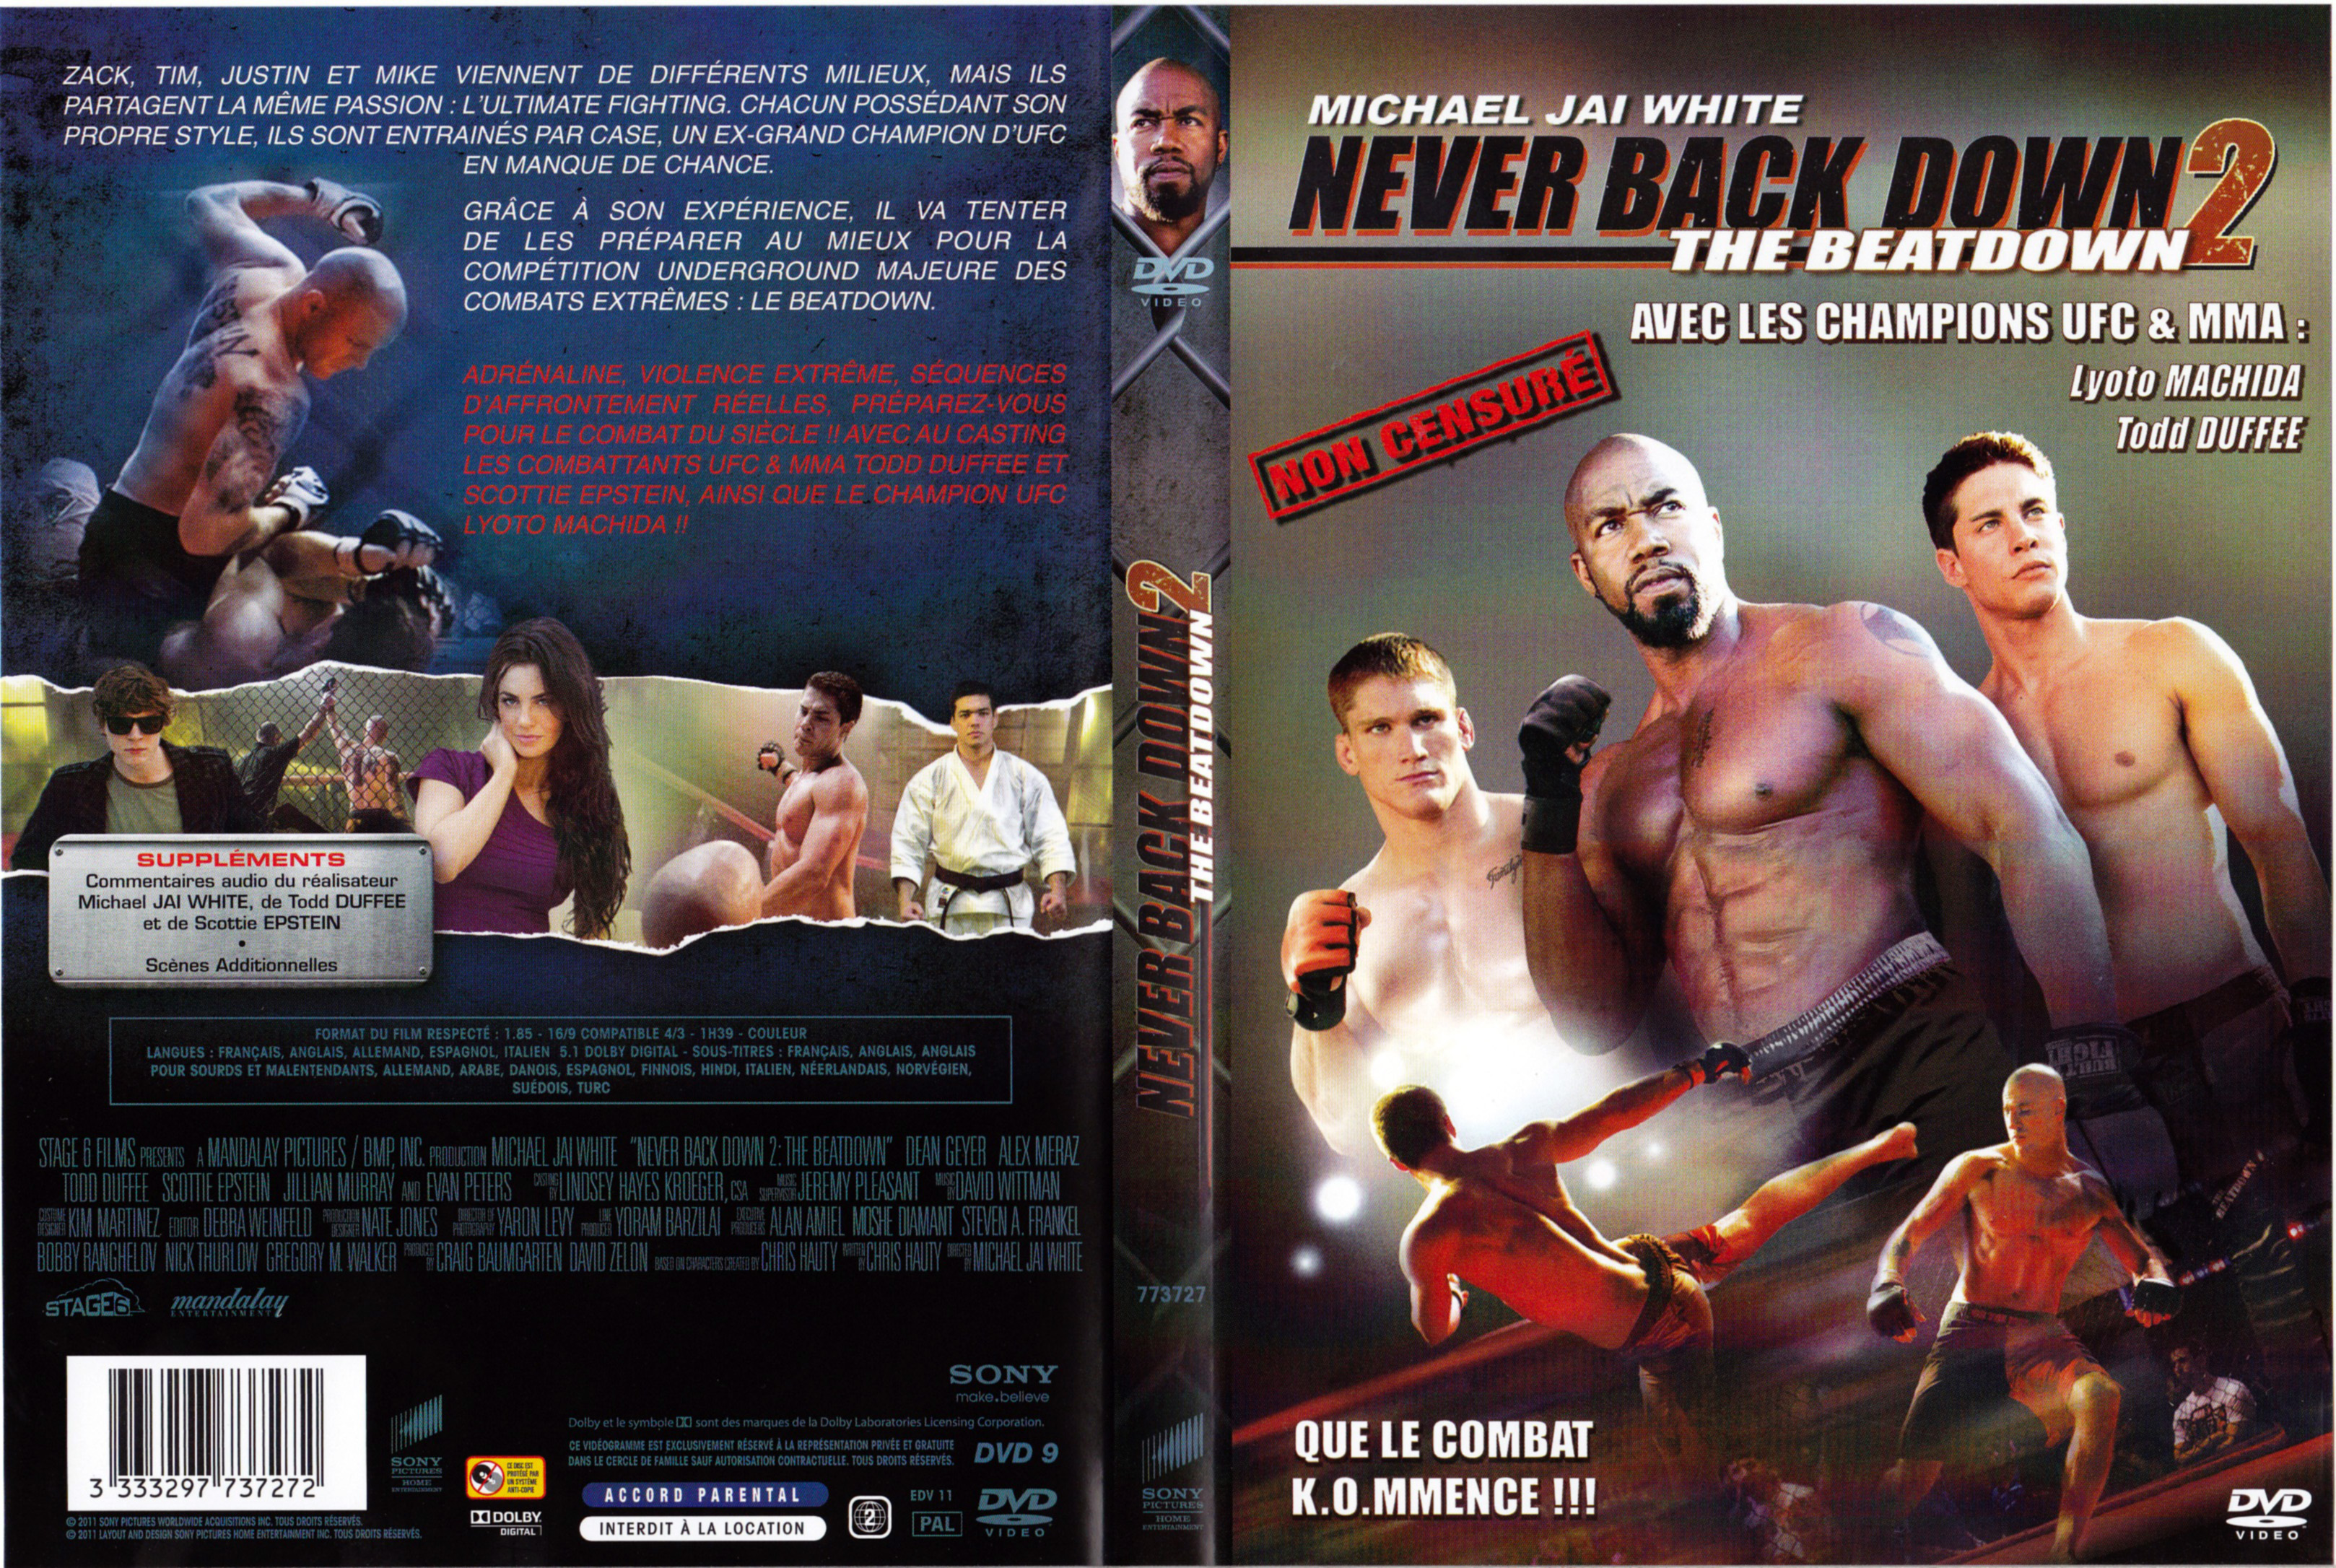 Jaquette DVD Never Back Down 2